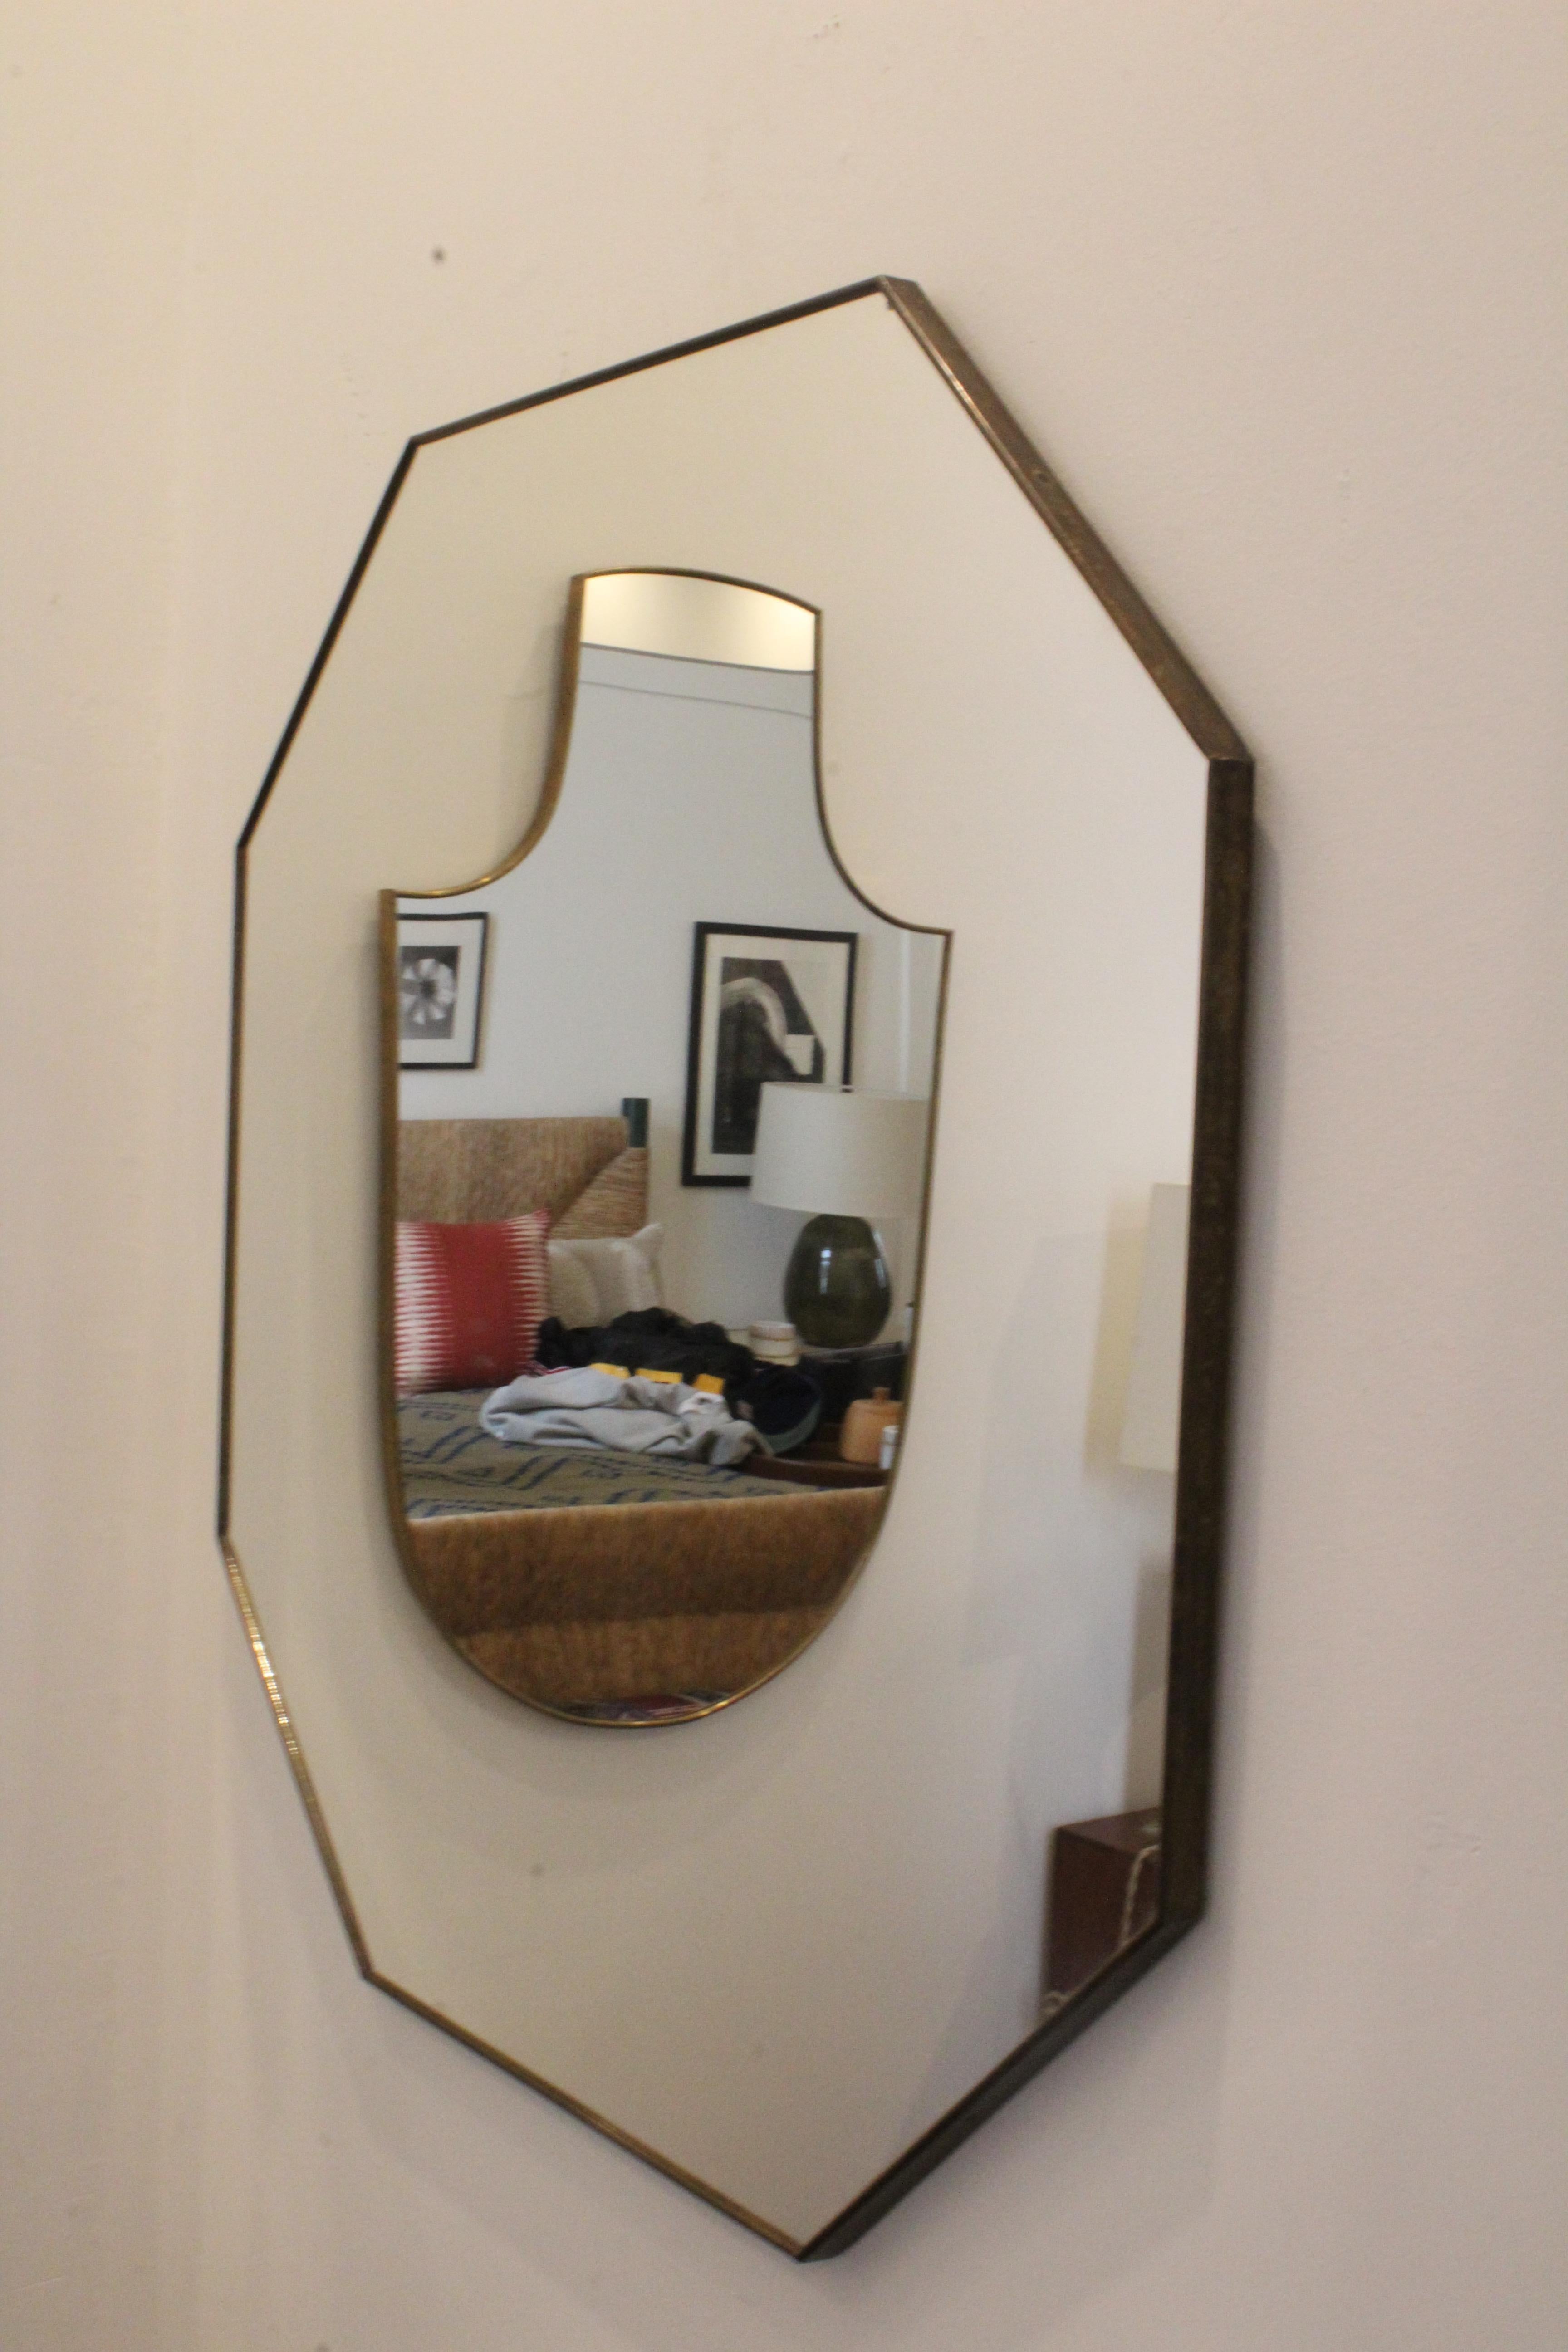 Vintage brass framed mirror, Italy, 1950s. In good condition with patina to the brass frame. Original mirror.